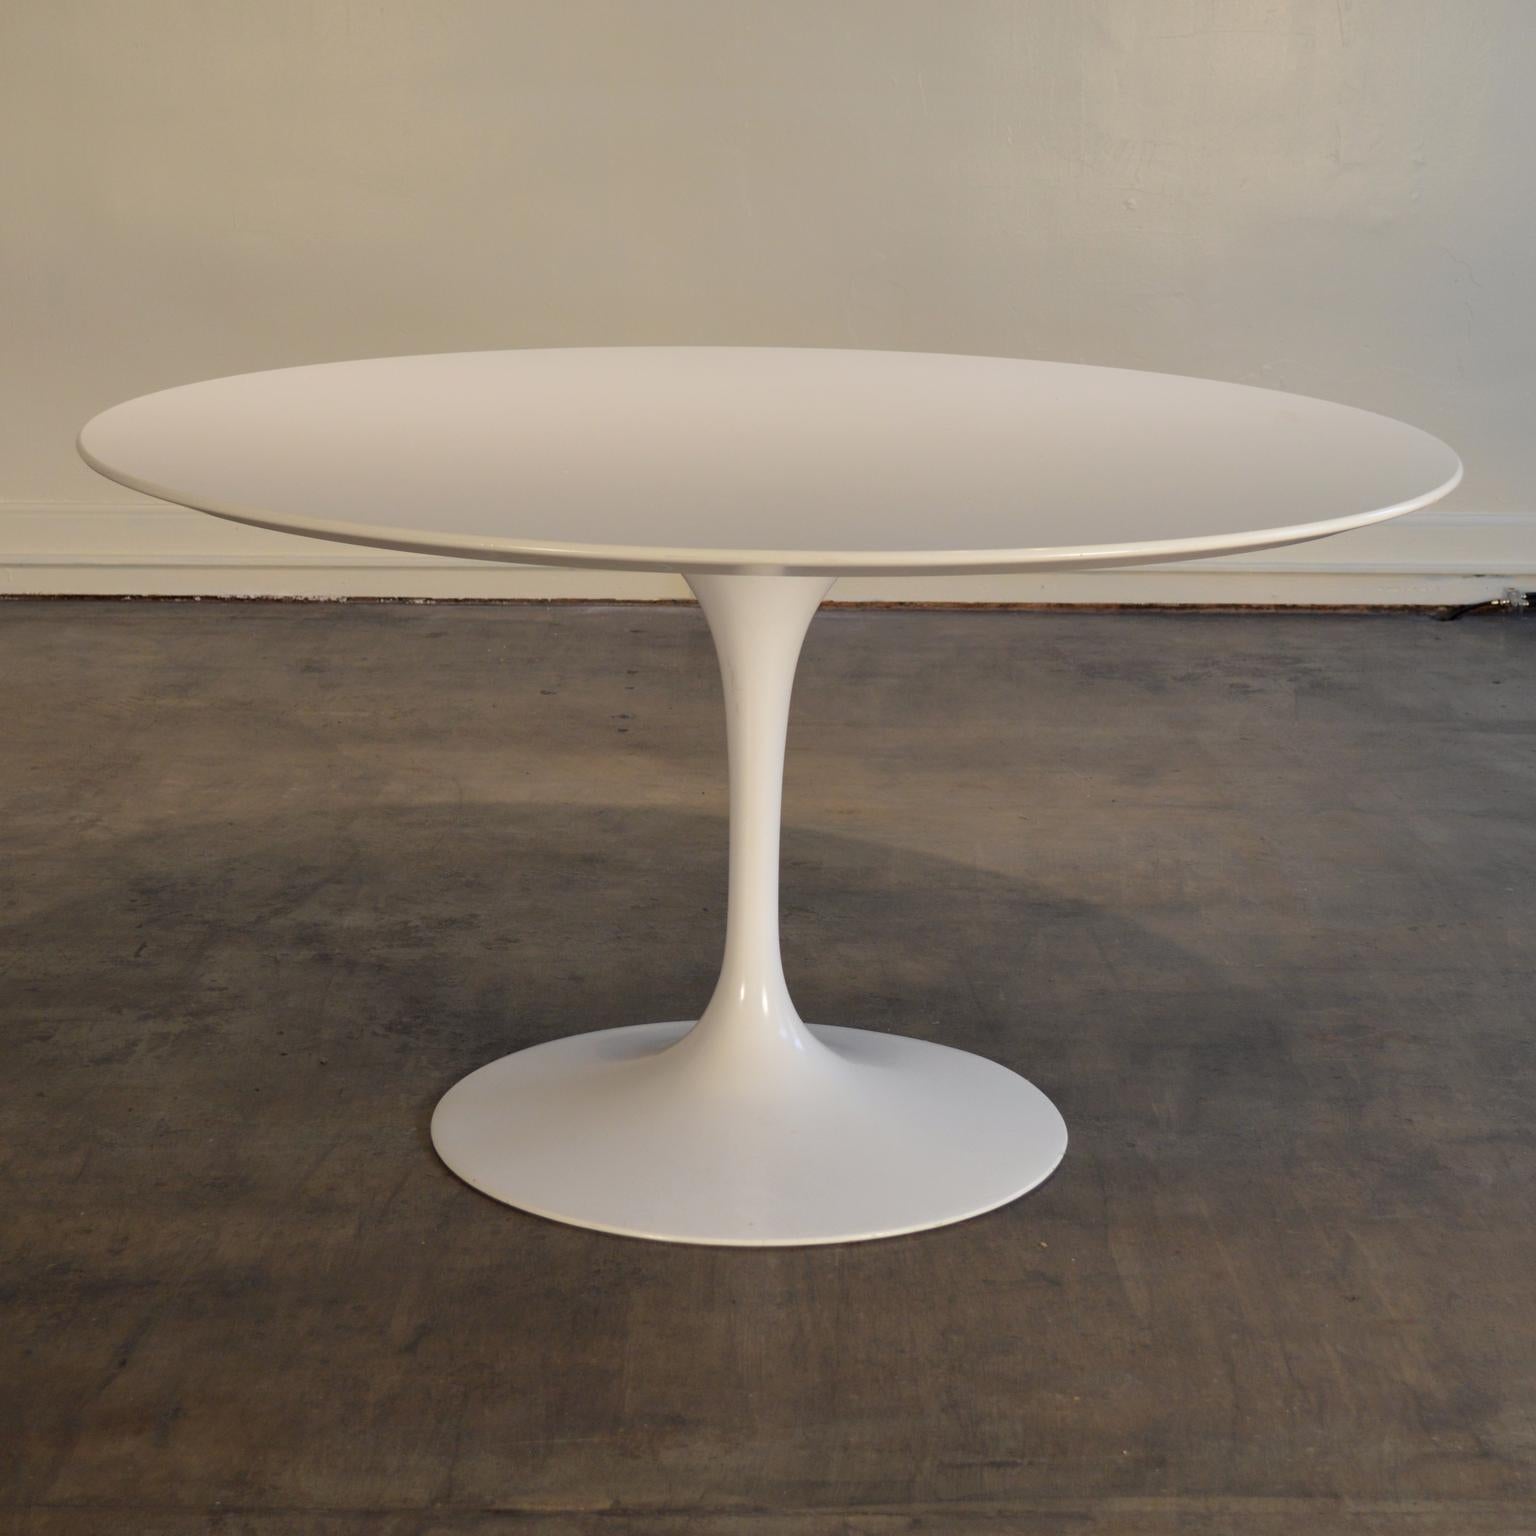 Eero Saarinen Pedestal Table Manufactured by Knoll. A Classic, 54